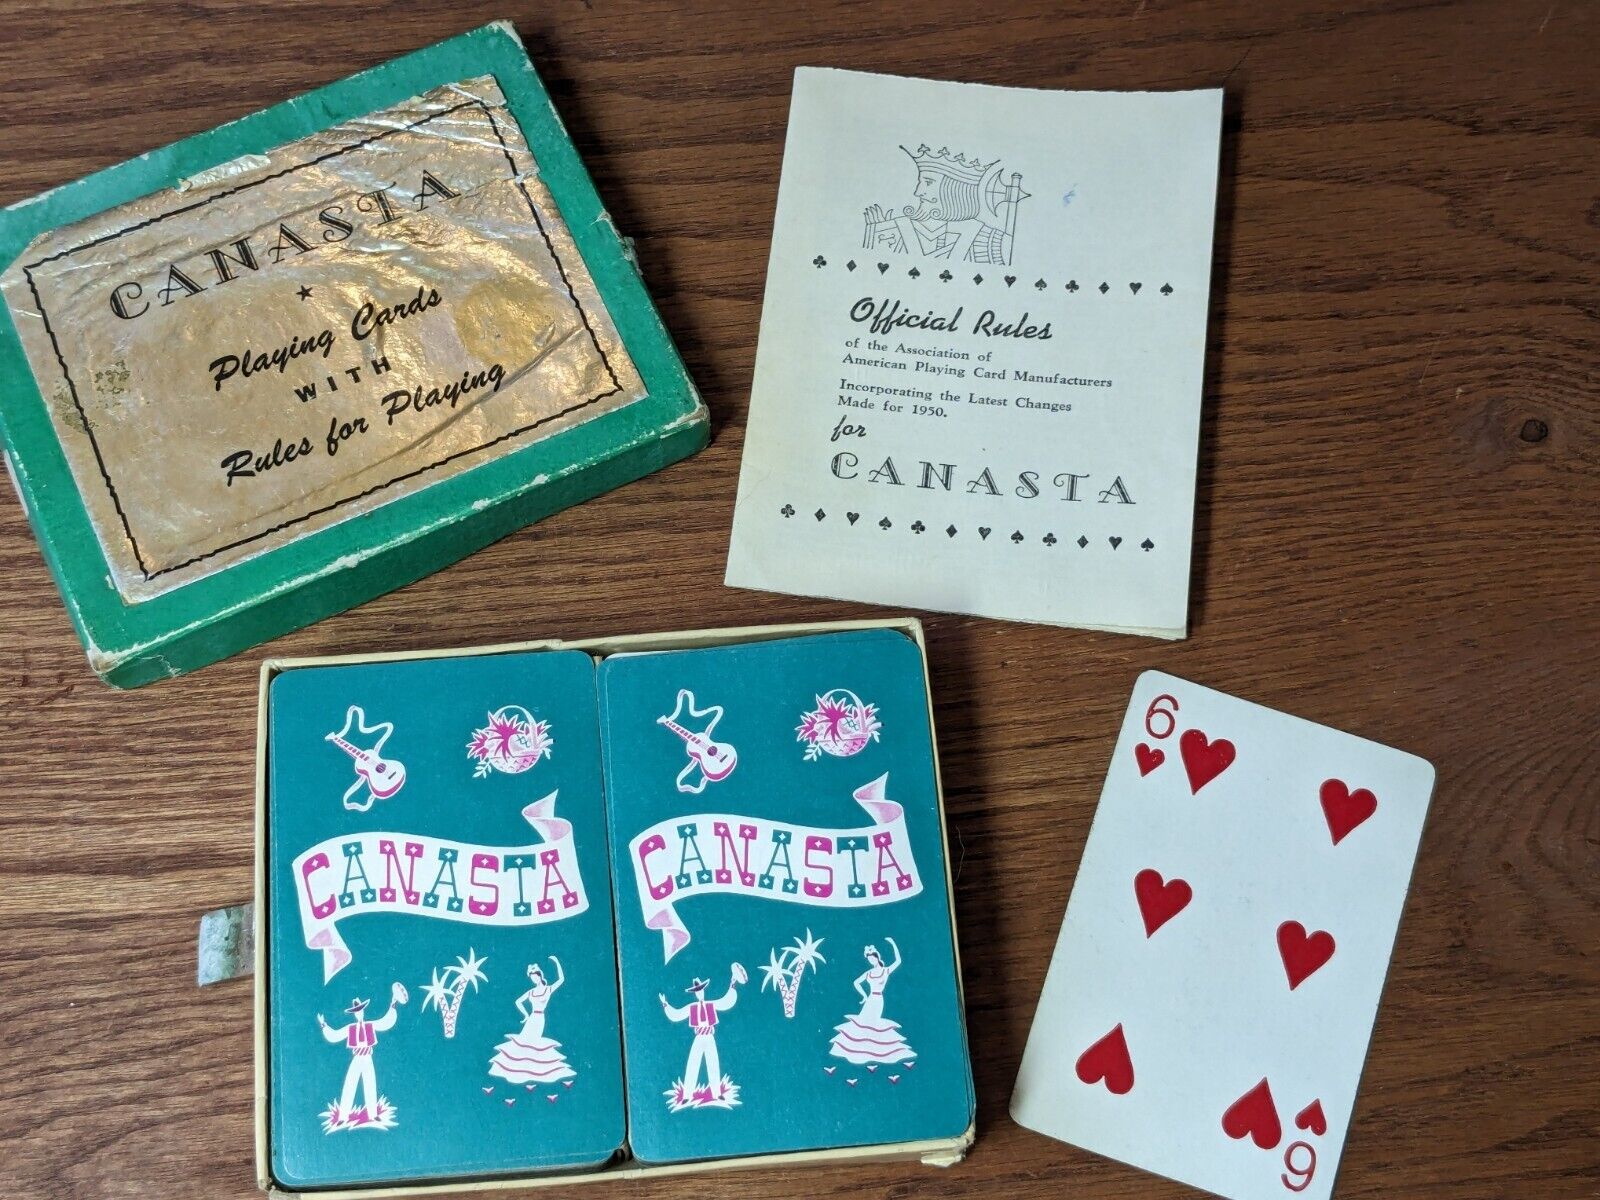 VINTAGE 1950s CANASTA PLAYING CARD SET COMPLETE WITH INSTRUCTIONS ORIGINAL BOX